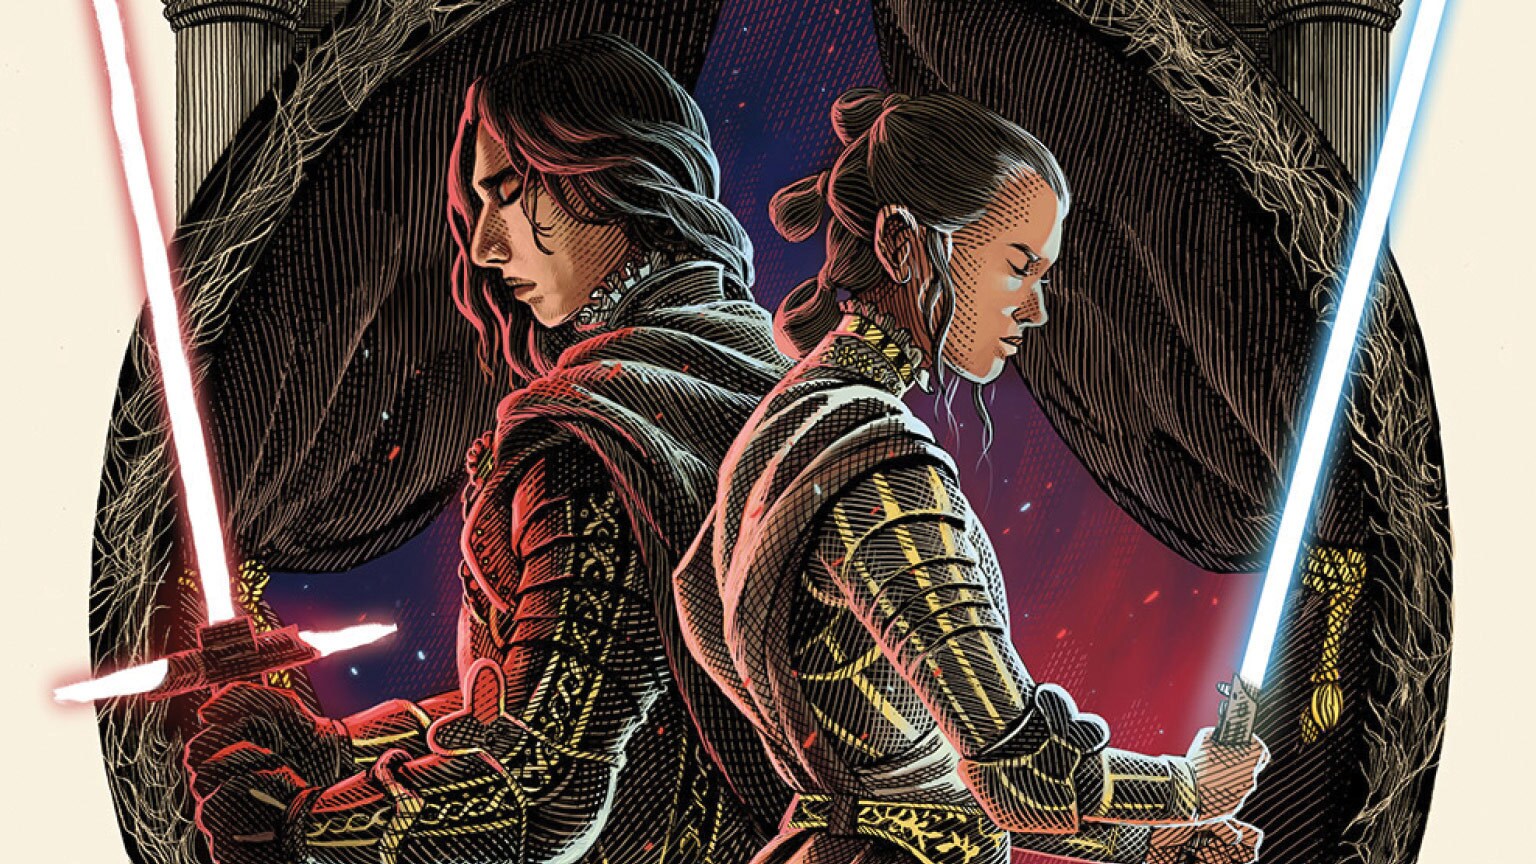 Checketh Out the Cover to The Merry Rise of Skywalker